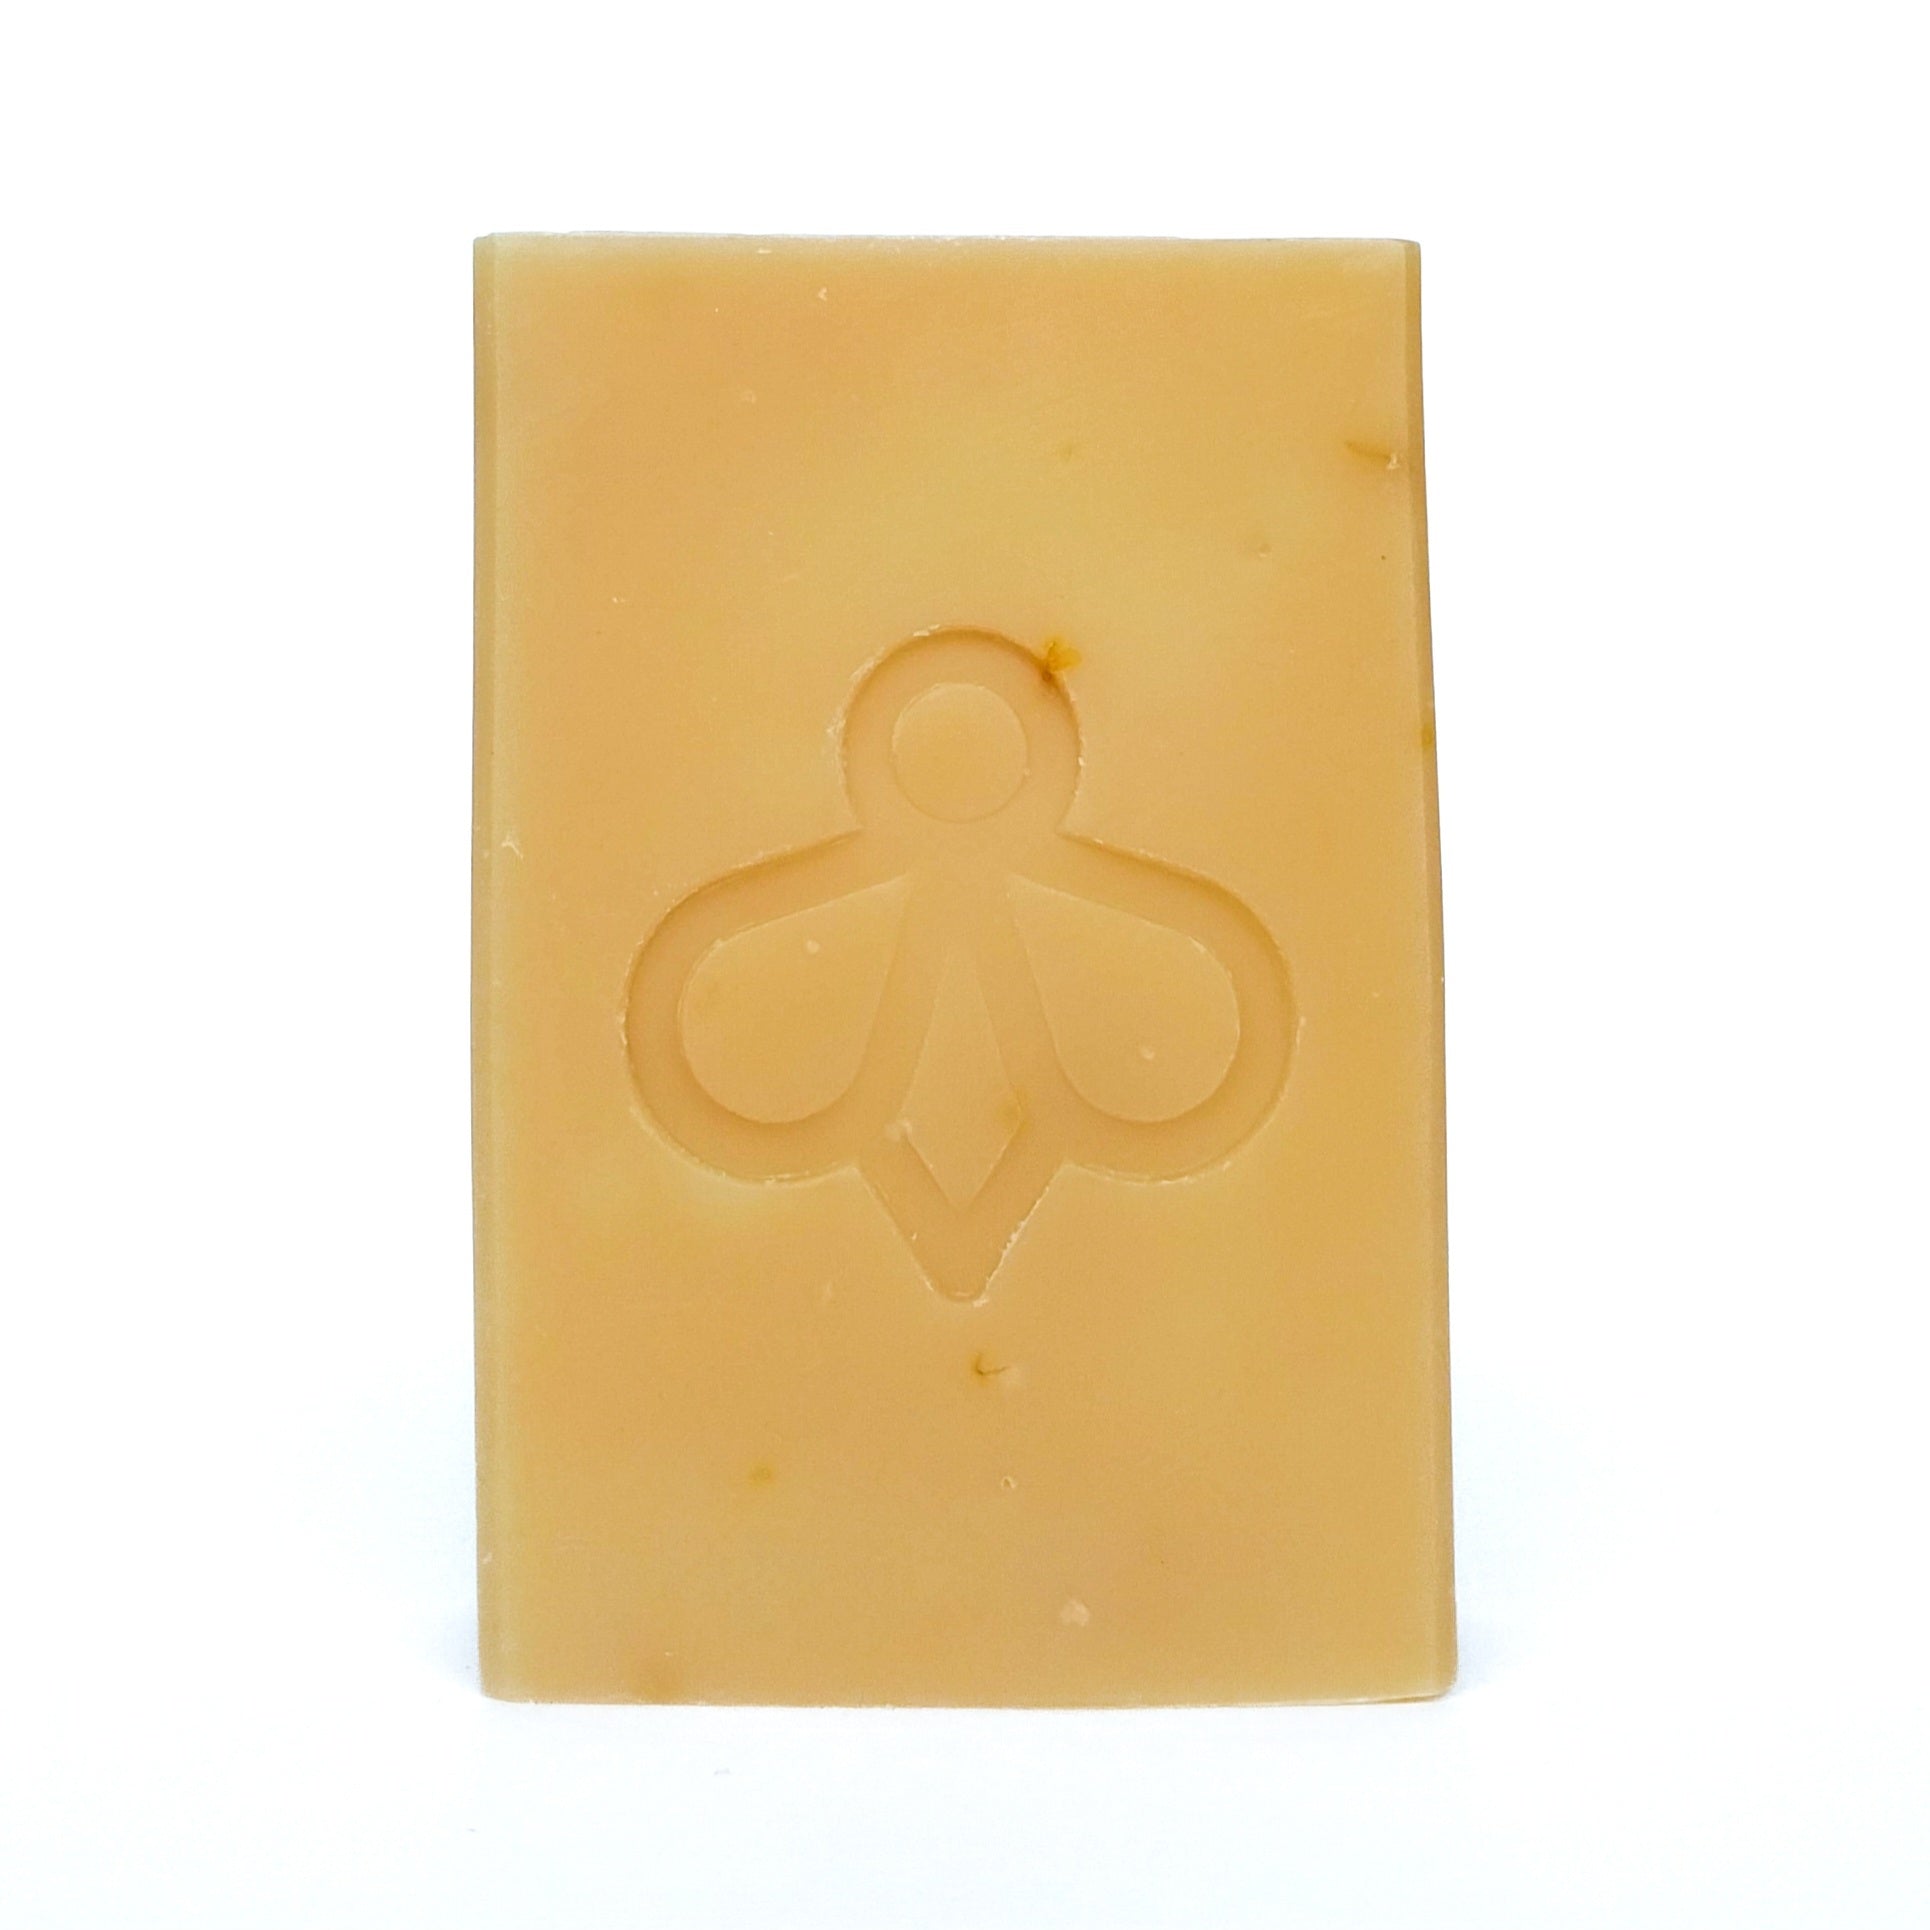 Sunshine soap, with Yellow Clay and Calendula Petals on White Background - Our soap features a soft, natural colour from yellow clay and is adorned with speckles of calendula petals, all showcased against a clean white background.